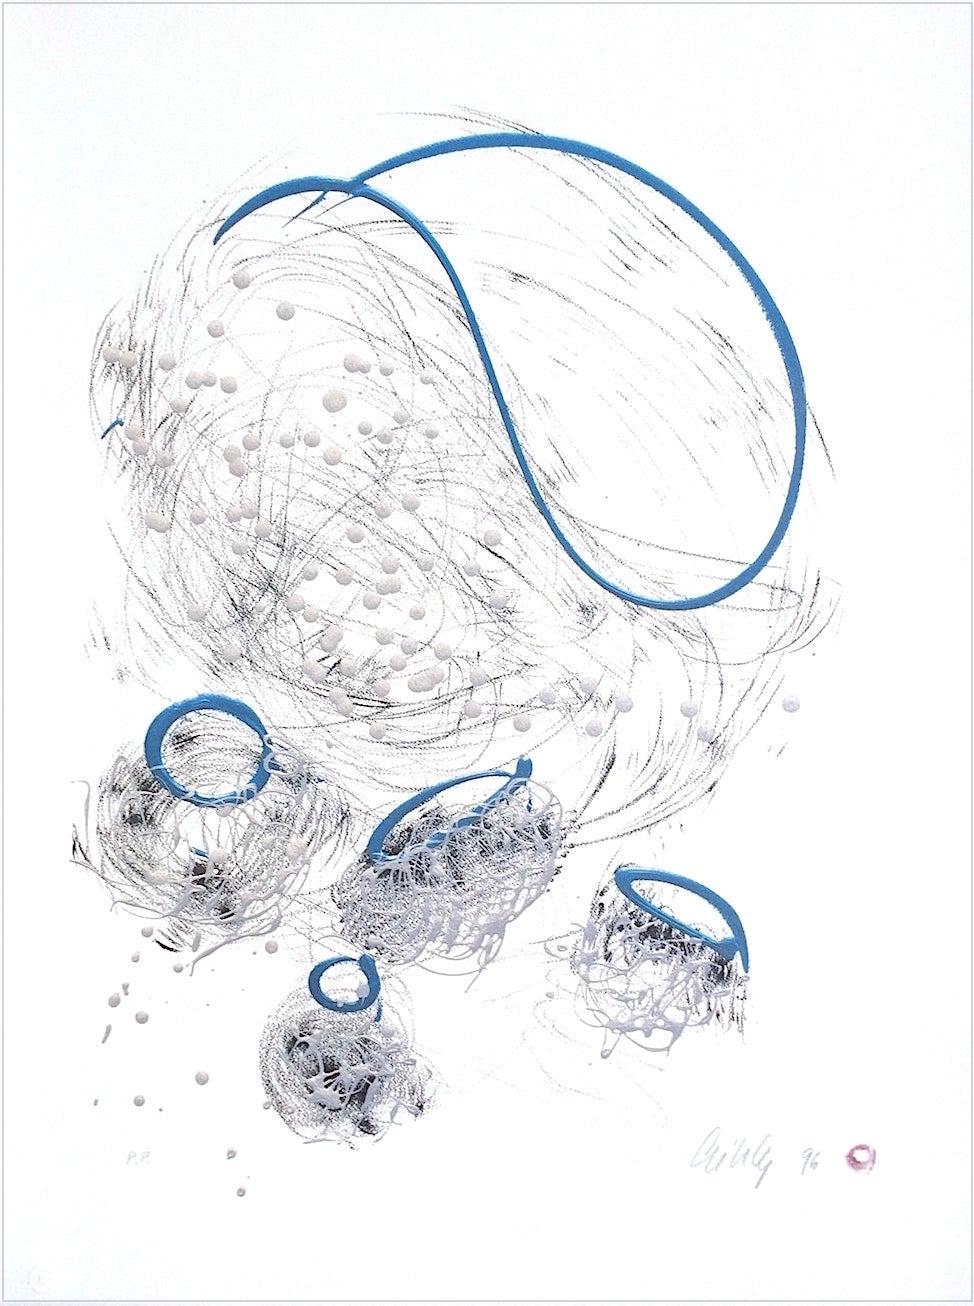 Dale Chihuly Abstract Print - BASKET DRAWING Signed Lithograph Free-form Abstract Drawing Graphite Pearl Blue 